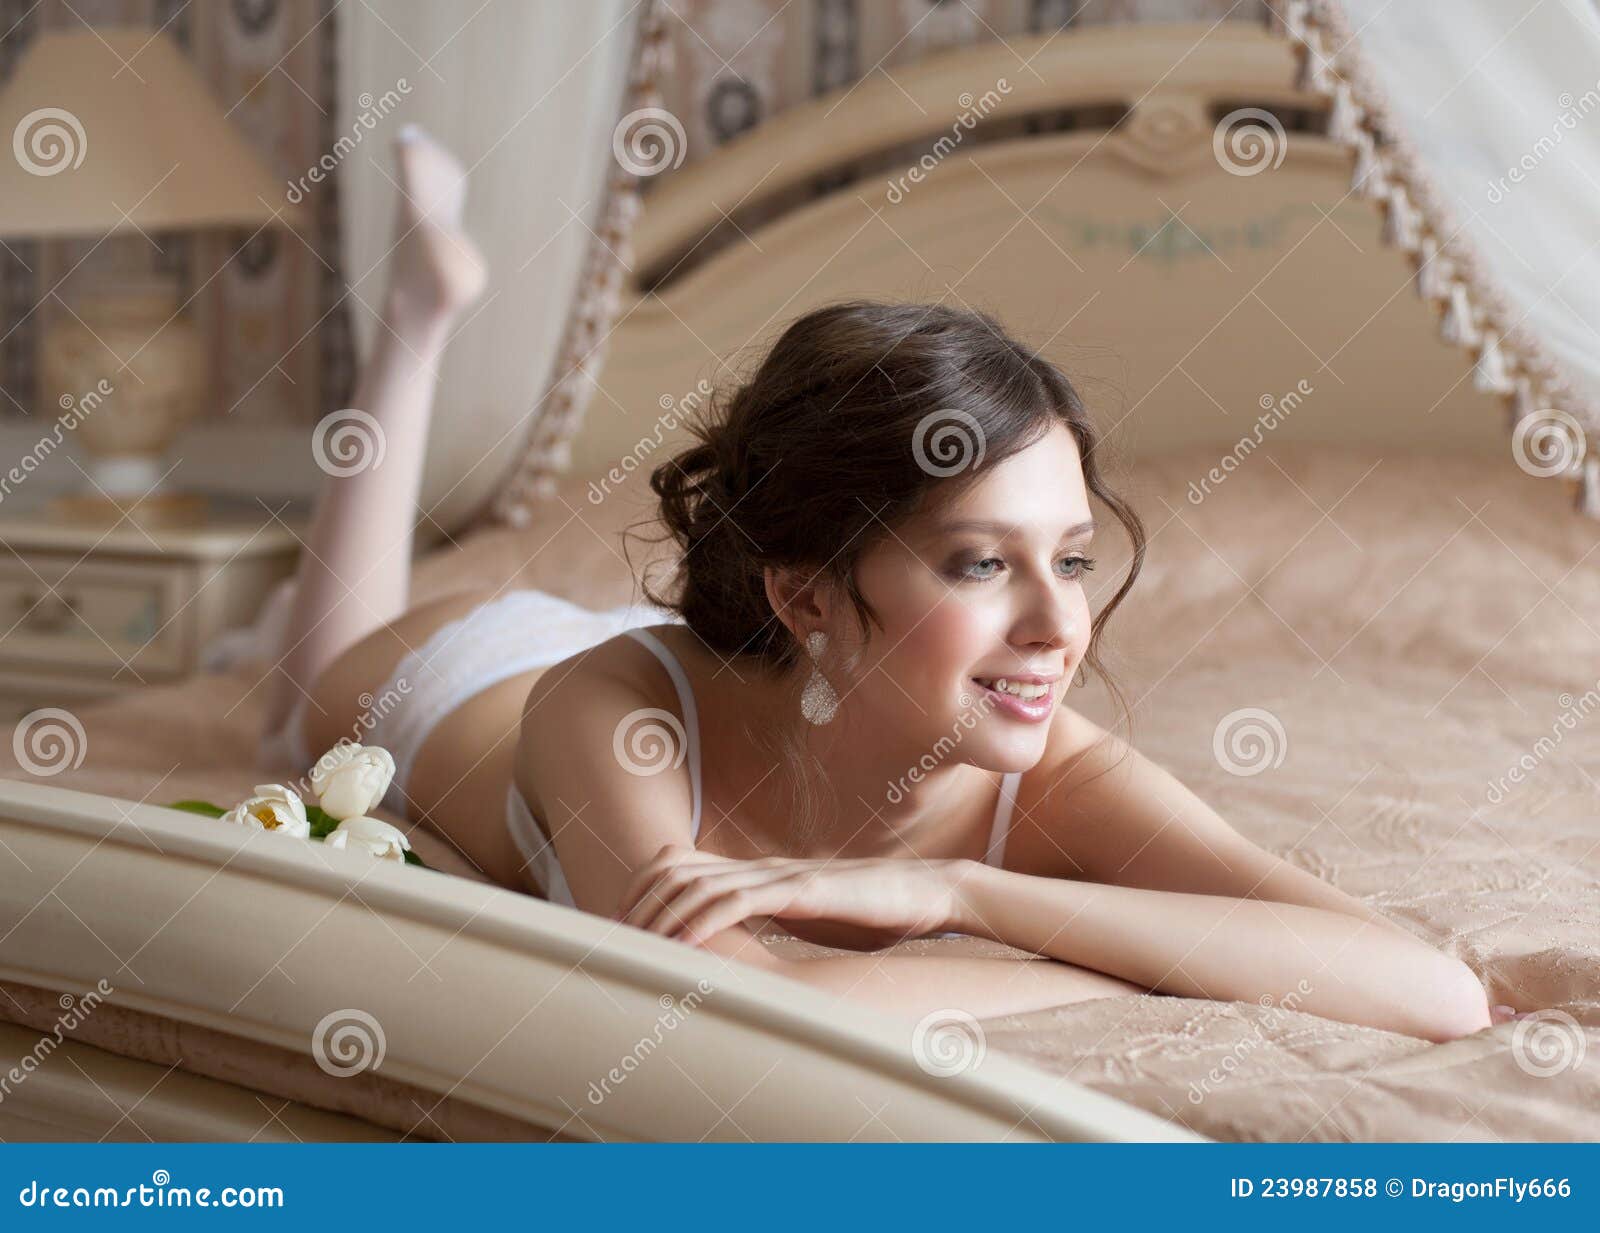 Woman In Lingerie Lying On Bed Stock Photo - Image: 23987858